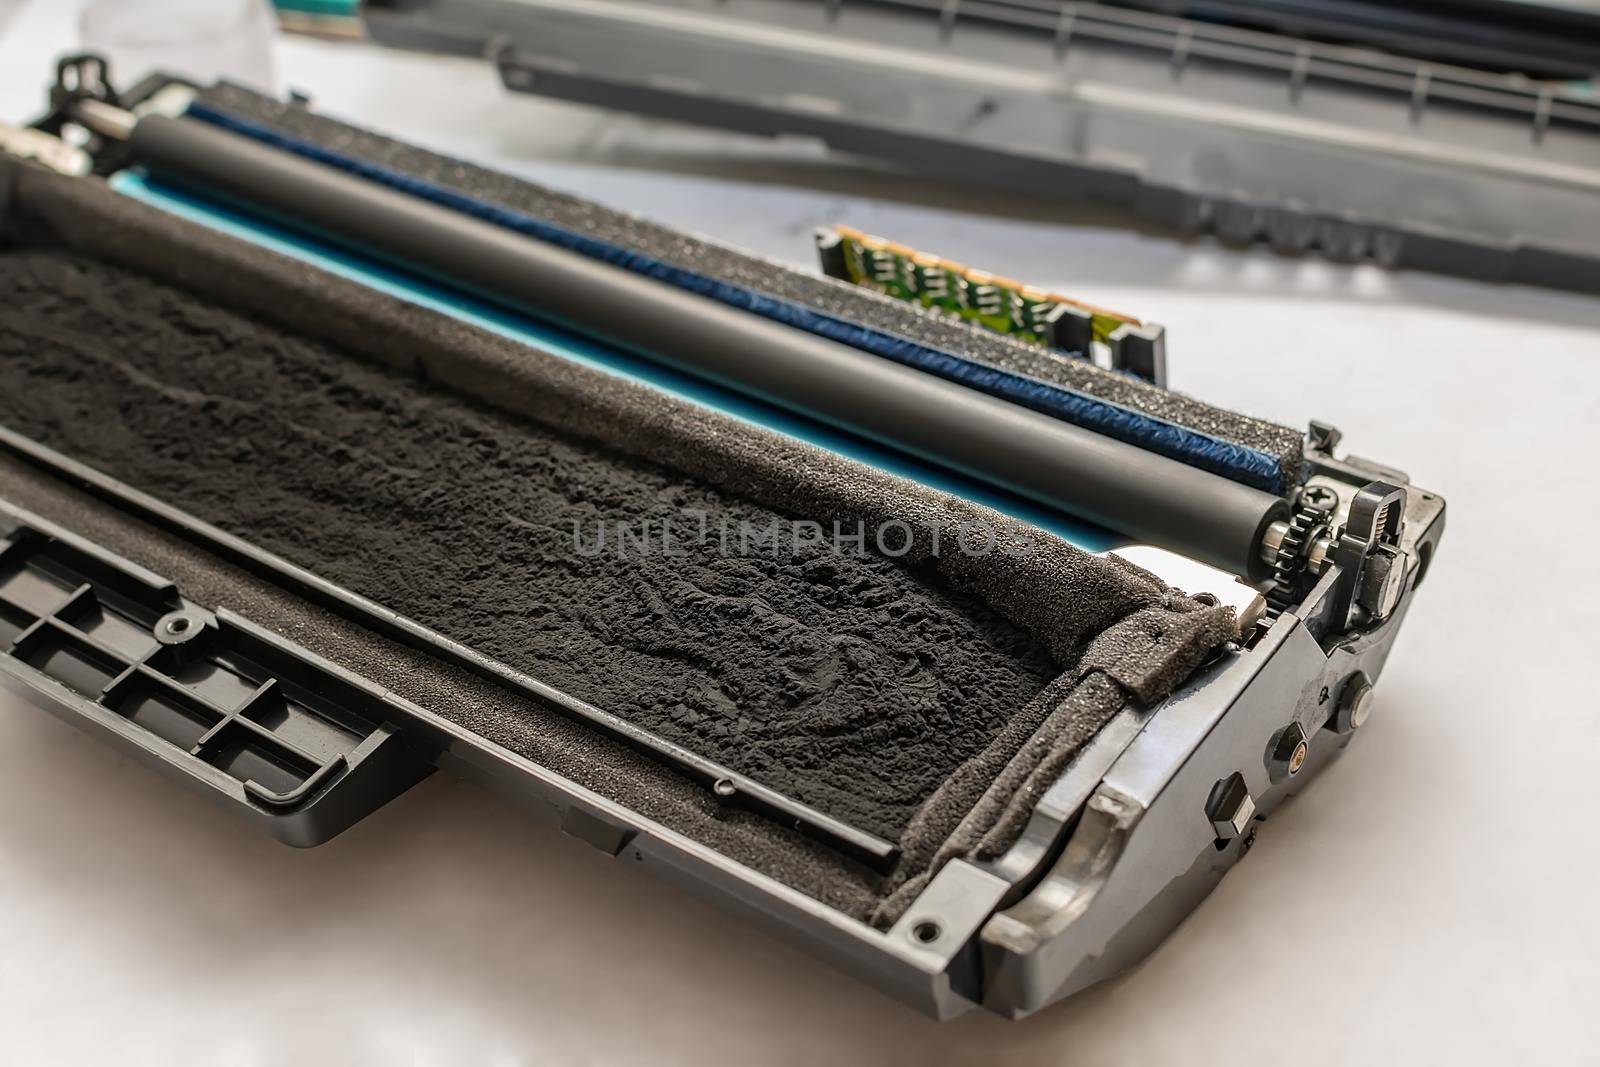 the cartridge from the laser printer, filled with toner, paint, with a chip, lies disassembled on a white table